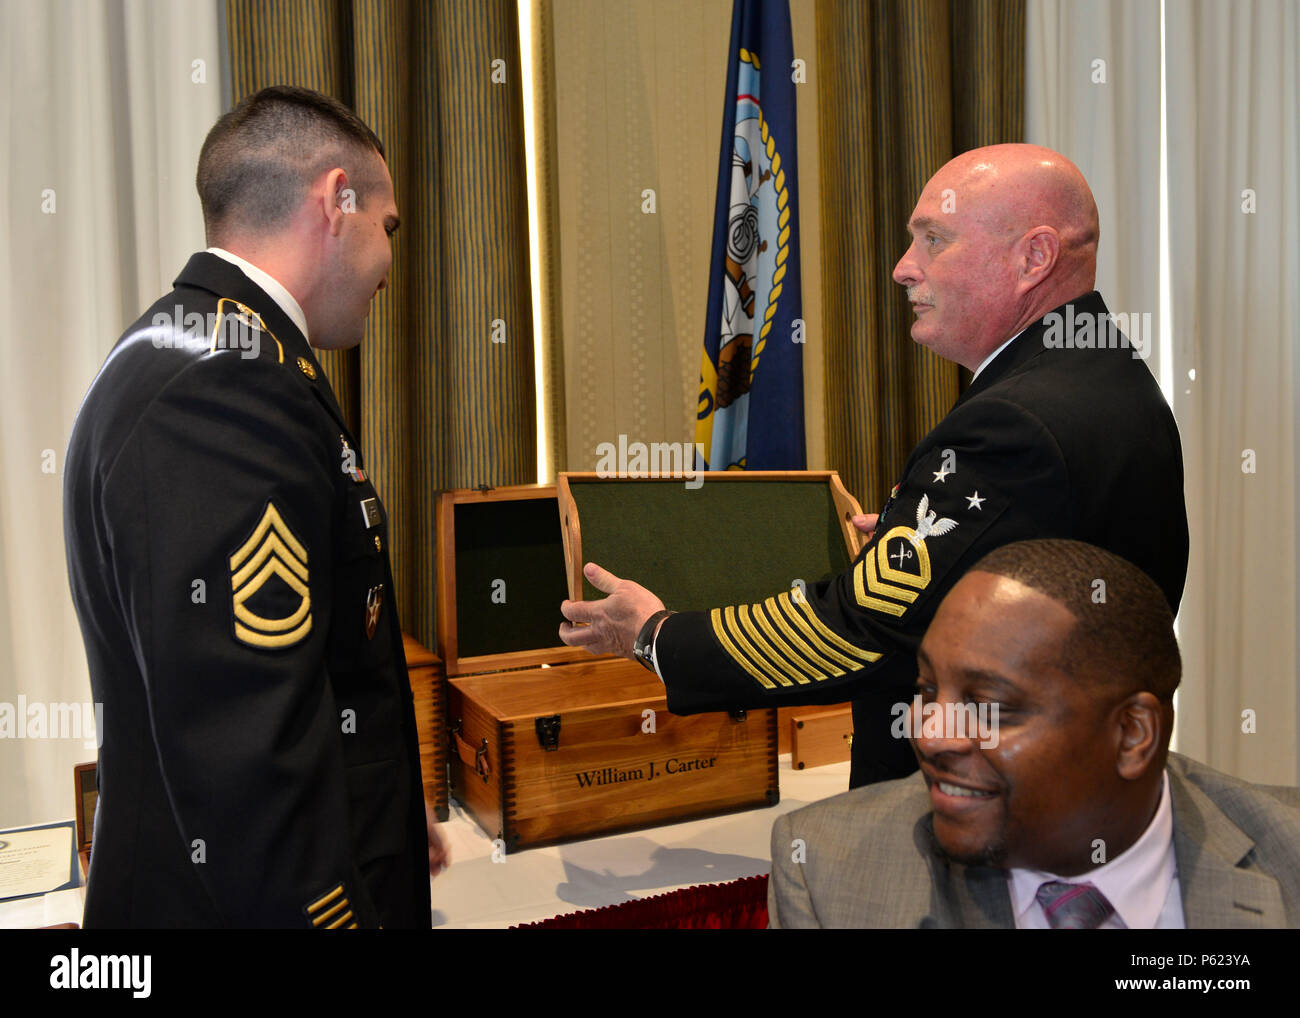 NORFOLK, Va. (Apr. 8, 2016) -- Master Chief Ship's Serviceman Kenneth Carter, assigned to Pre-Commissioning Unit Gerald R. Ford (CVN 78) presents his son, Army Sgt. 1st Class Billy Carter, with a keepsake box during his retirement at Vista Point Conference Center at Naval Station Norfolk. Master Chief Carter retired after 30 years of service in the Navy, originally reporting to Recruit Training Command in Orlando, Florida, in 1986. (U.S. Navy photo by Mass Communication Specialist Seaman Apprentice Gitte Schirrmacher/Released) Stock Photo